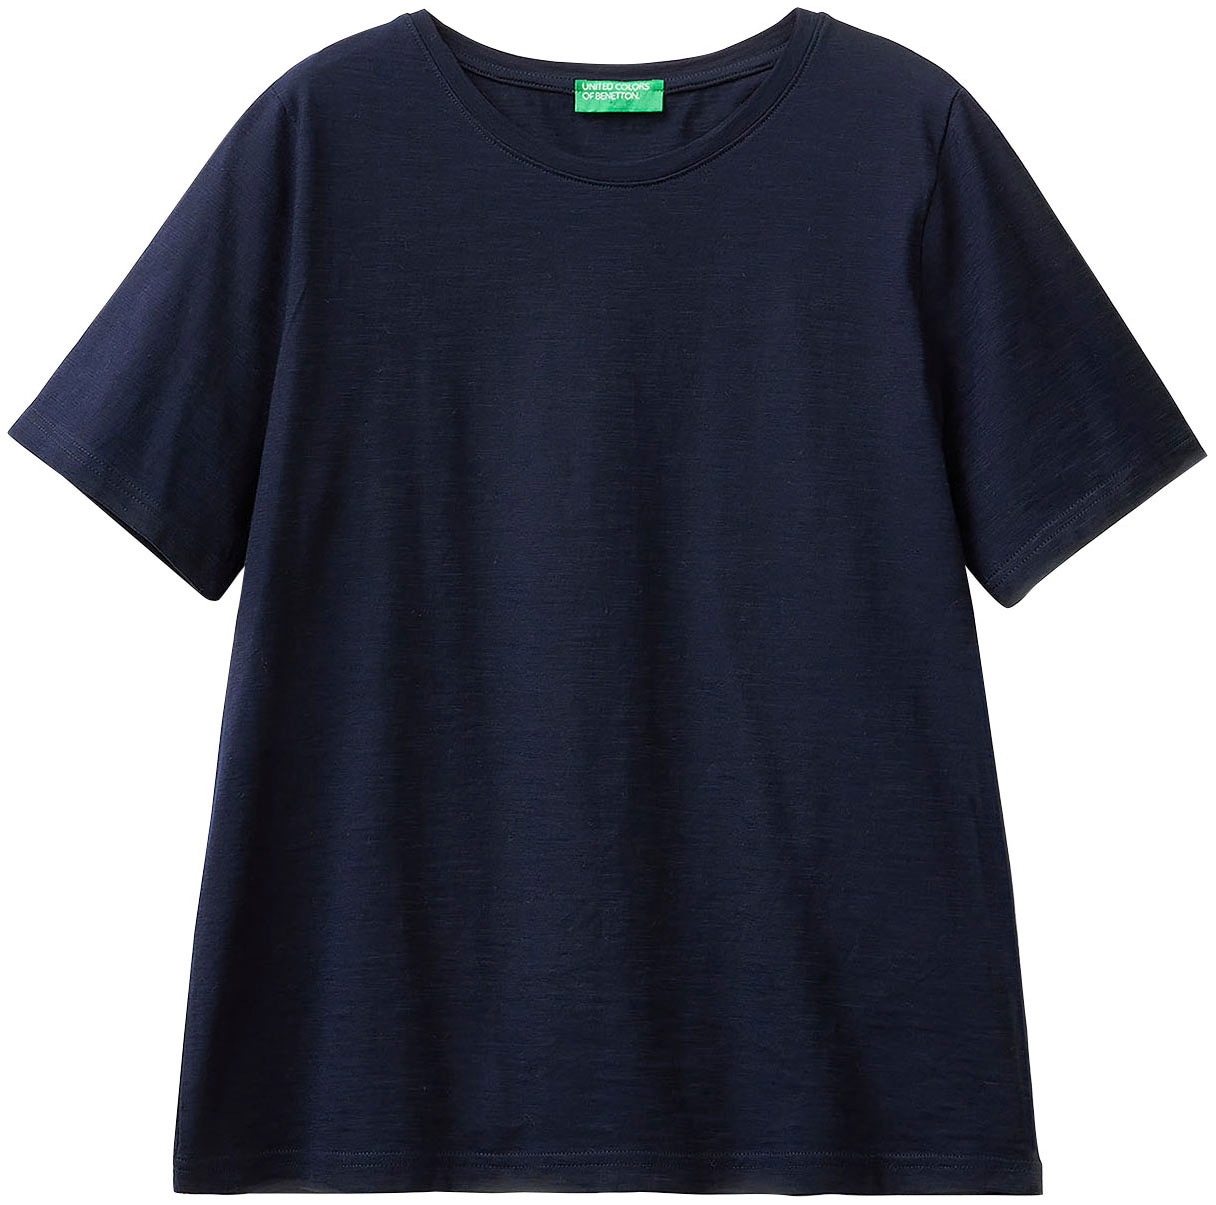 bei Benetton cleaner T-Shirt, Basic-Optik in ♕ Colors of United